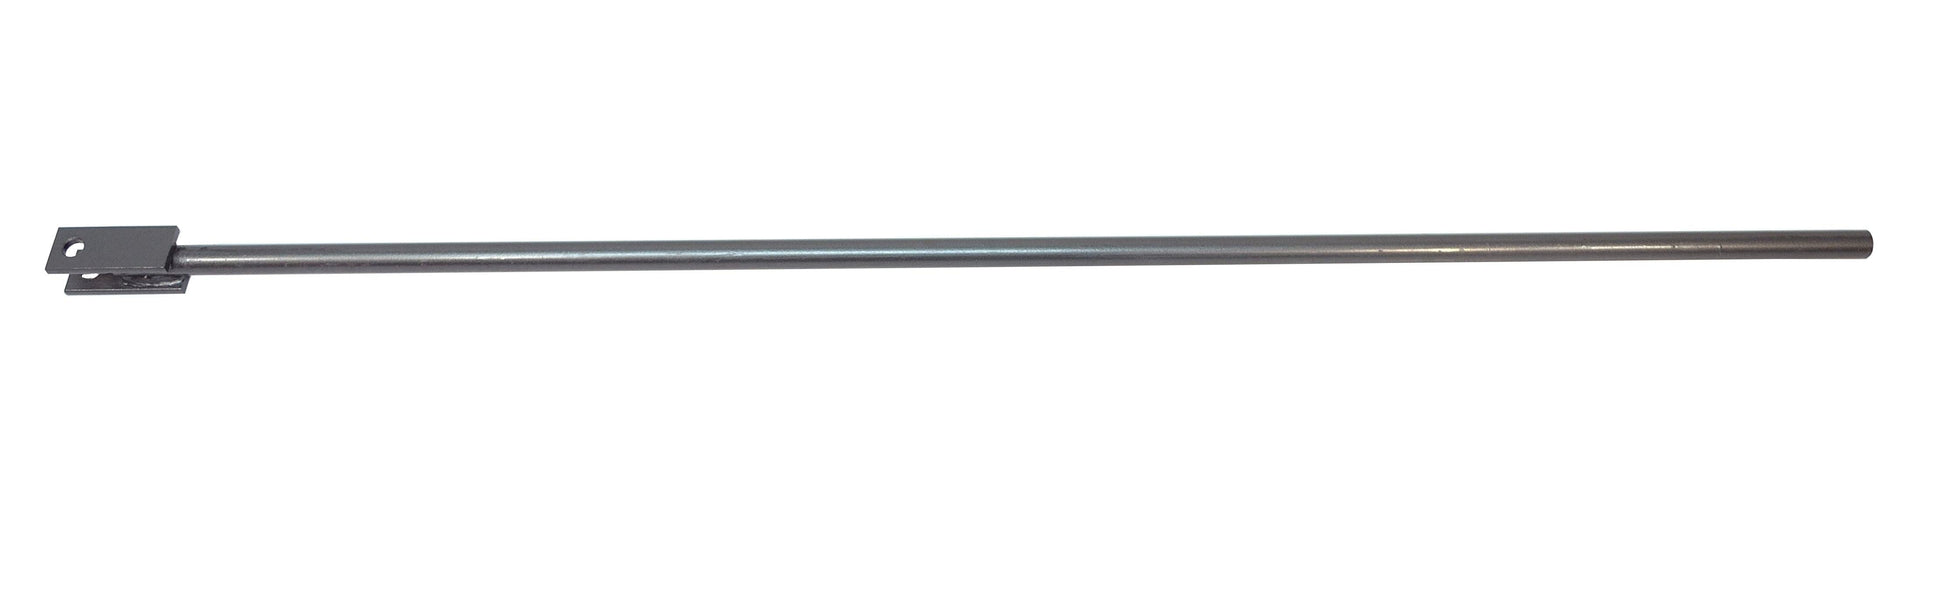 512-980 Push Rod Assembly - McGuire